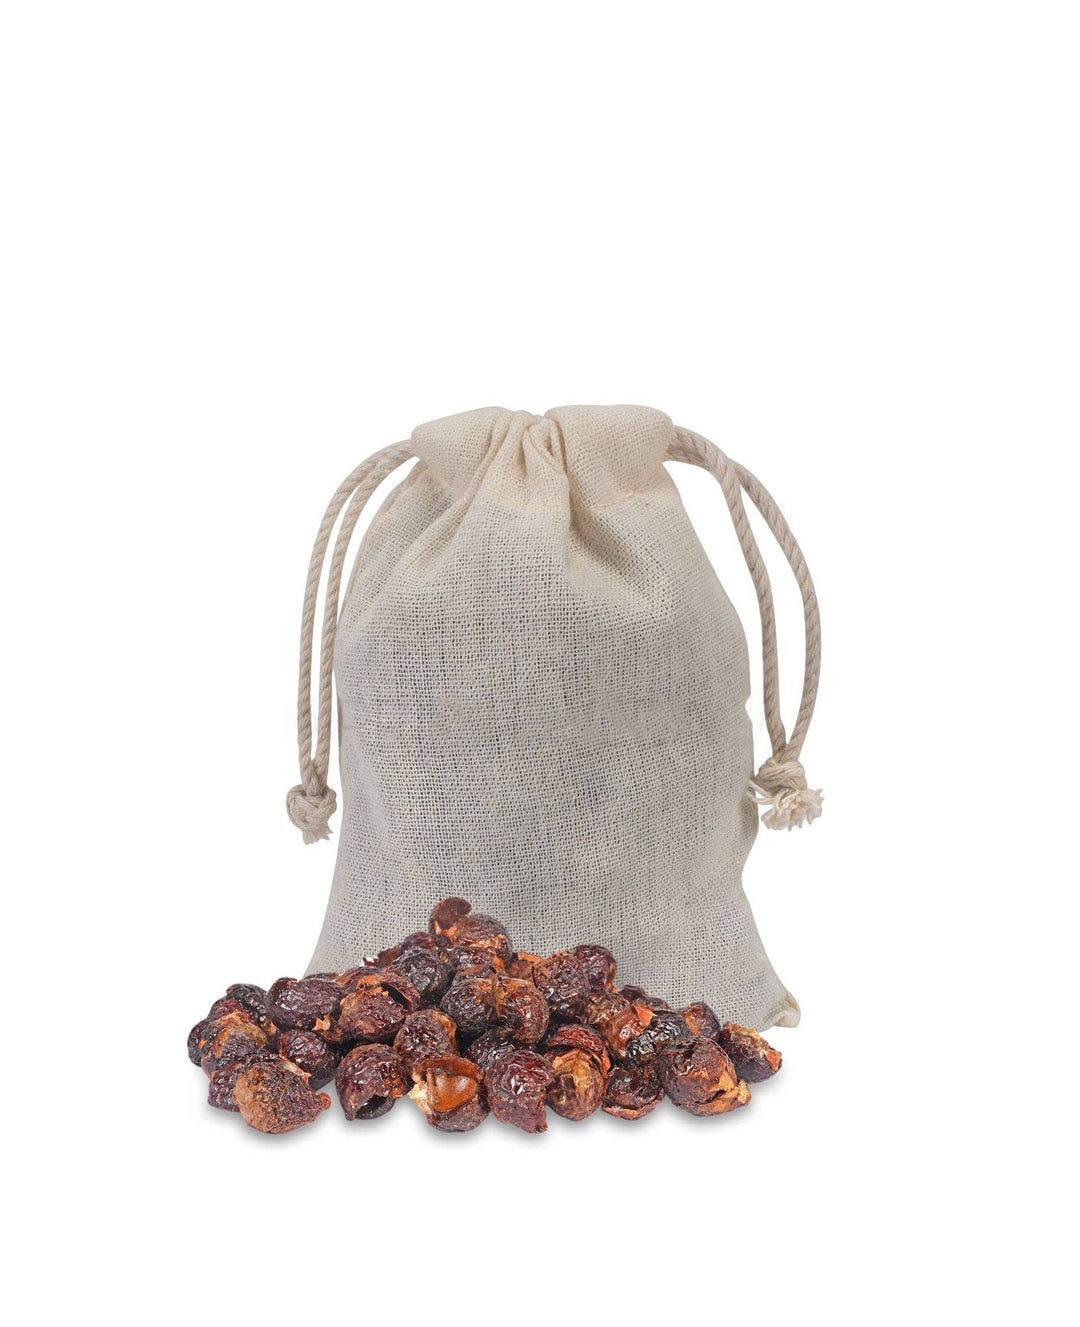 Organic Laundry Soap Nuts - Free Living Co